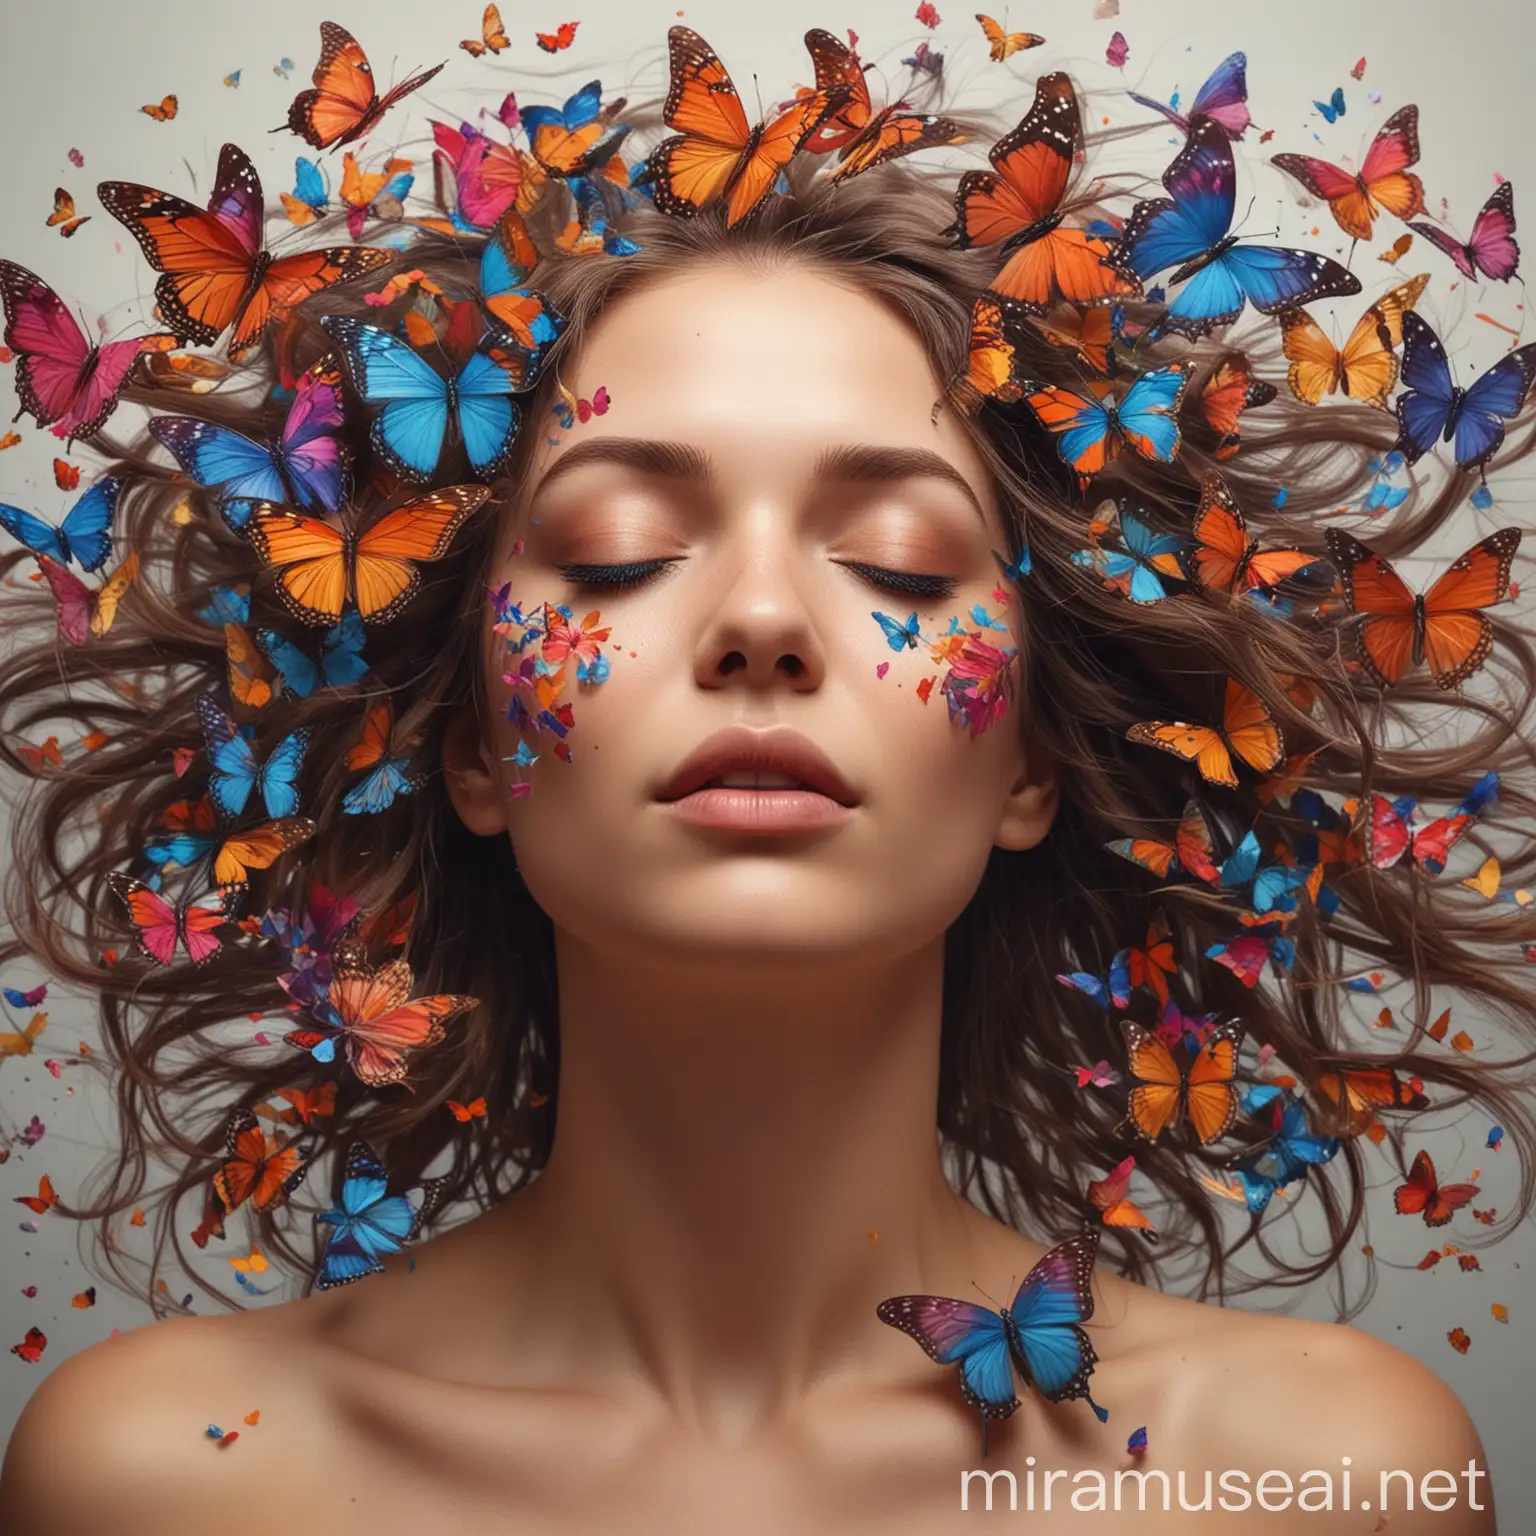 Empowering Women Serene Woman with Closed Eyes and Butterfly Adorned Hair